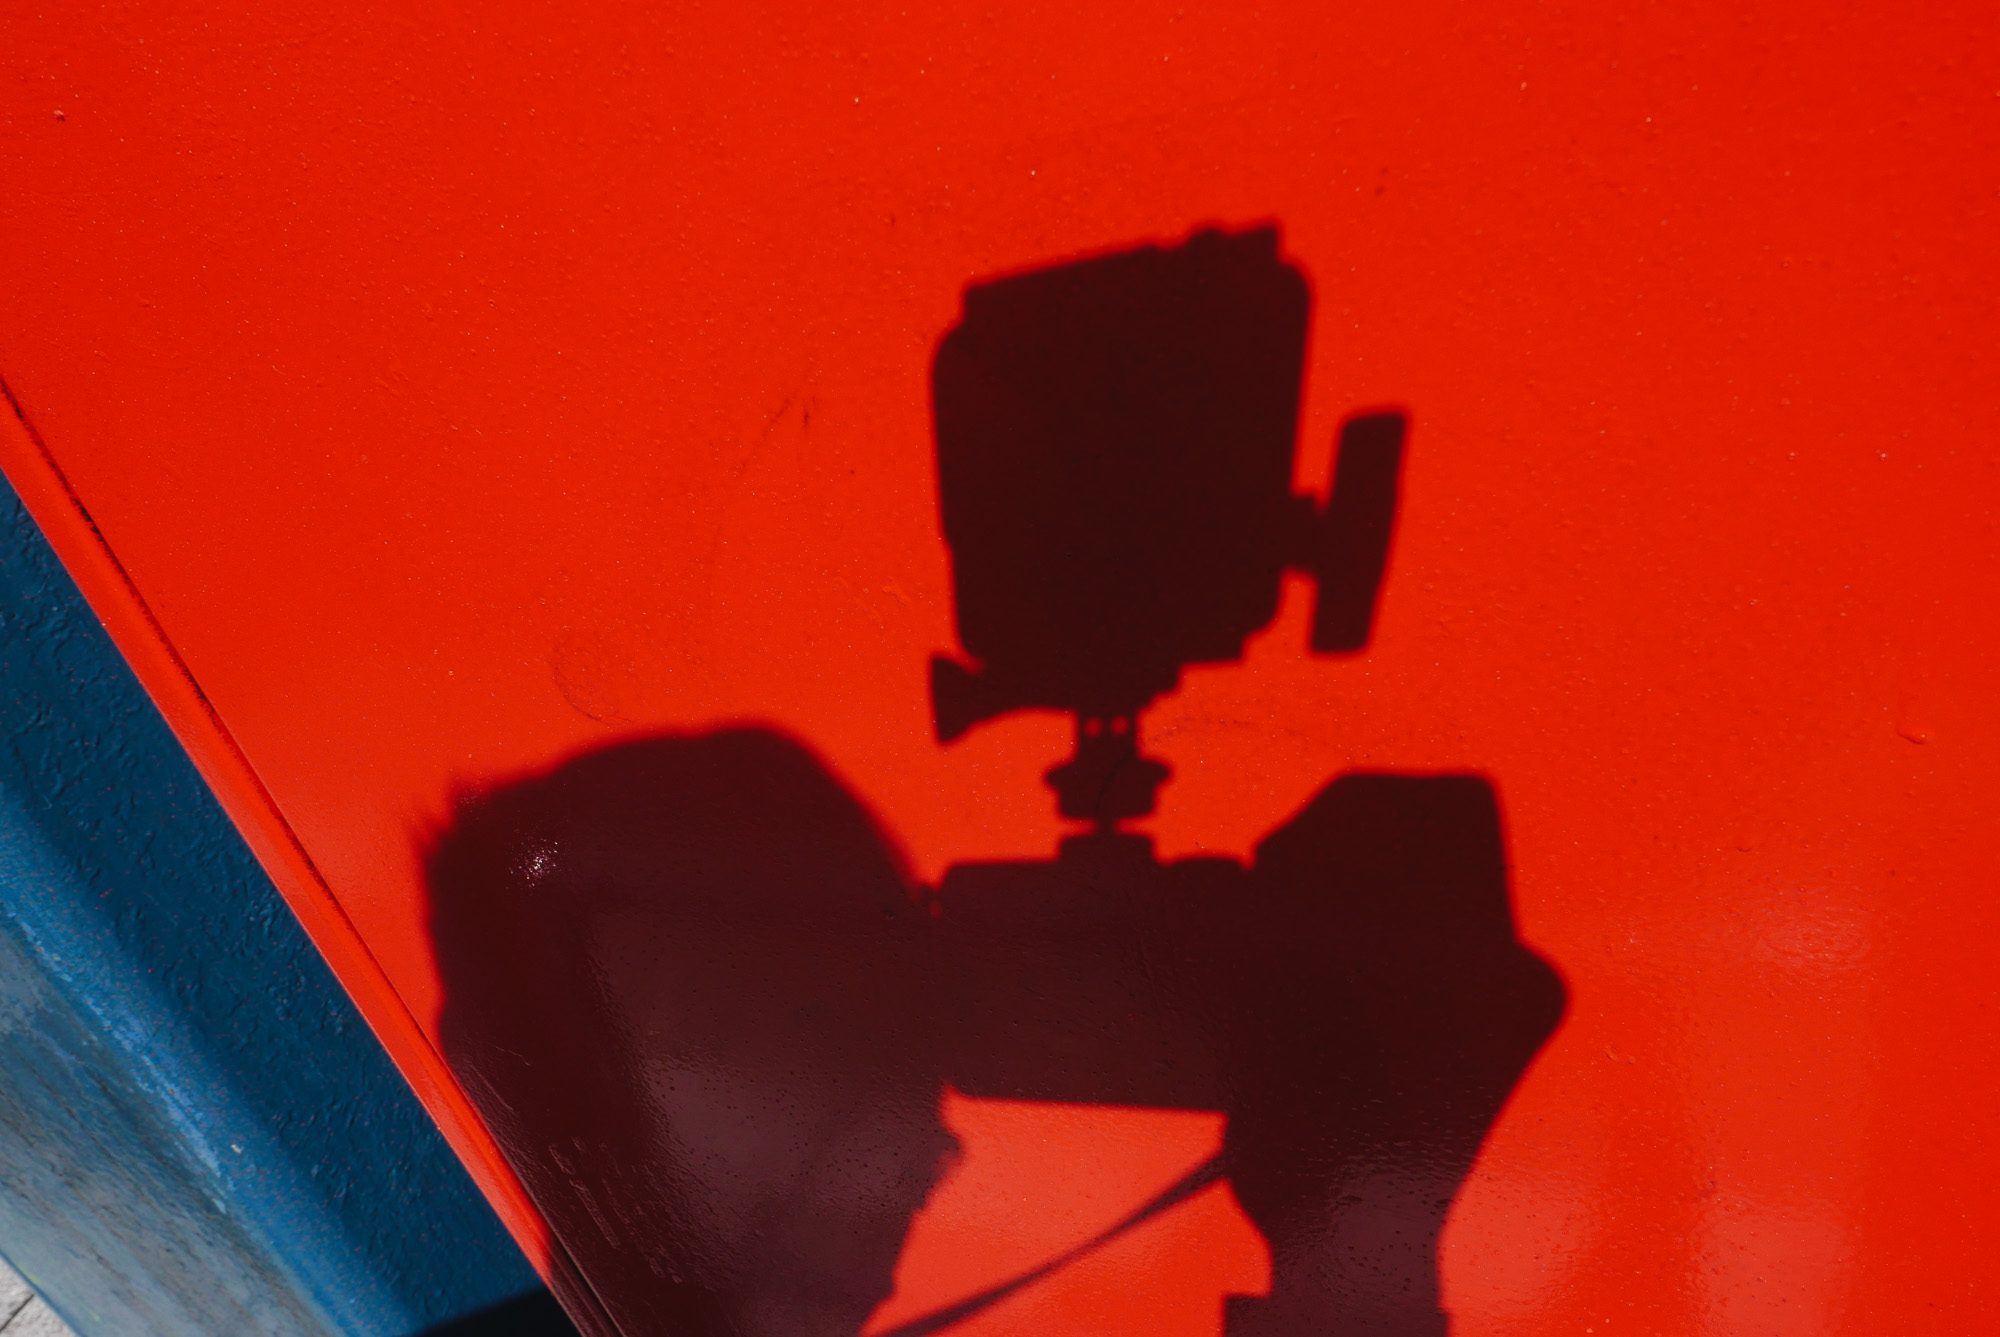 GoPro selfie red and blue background